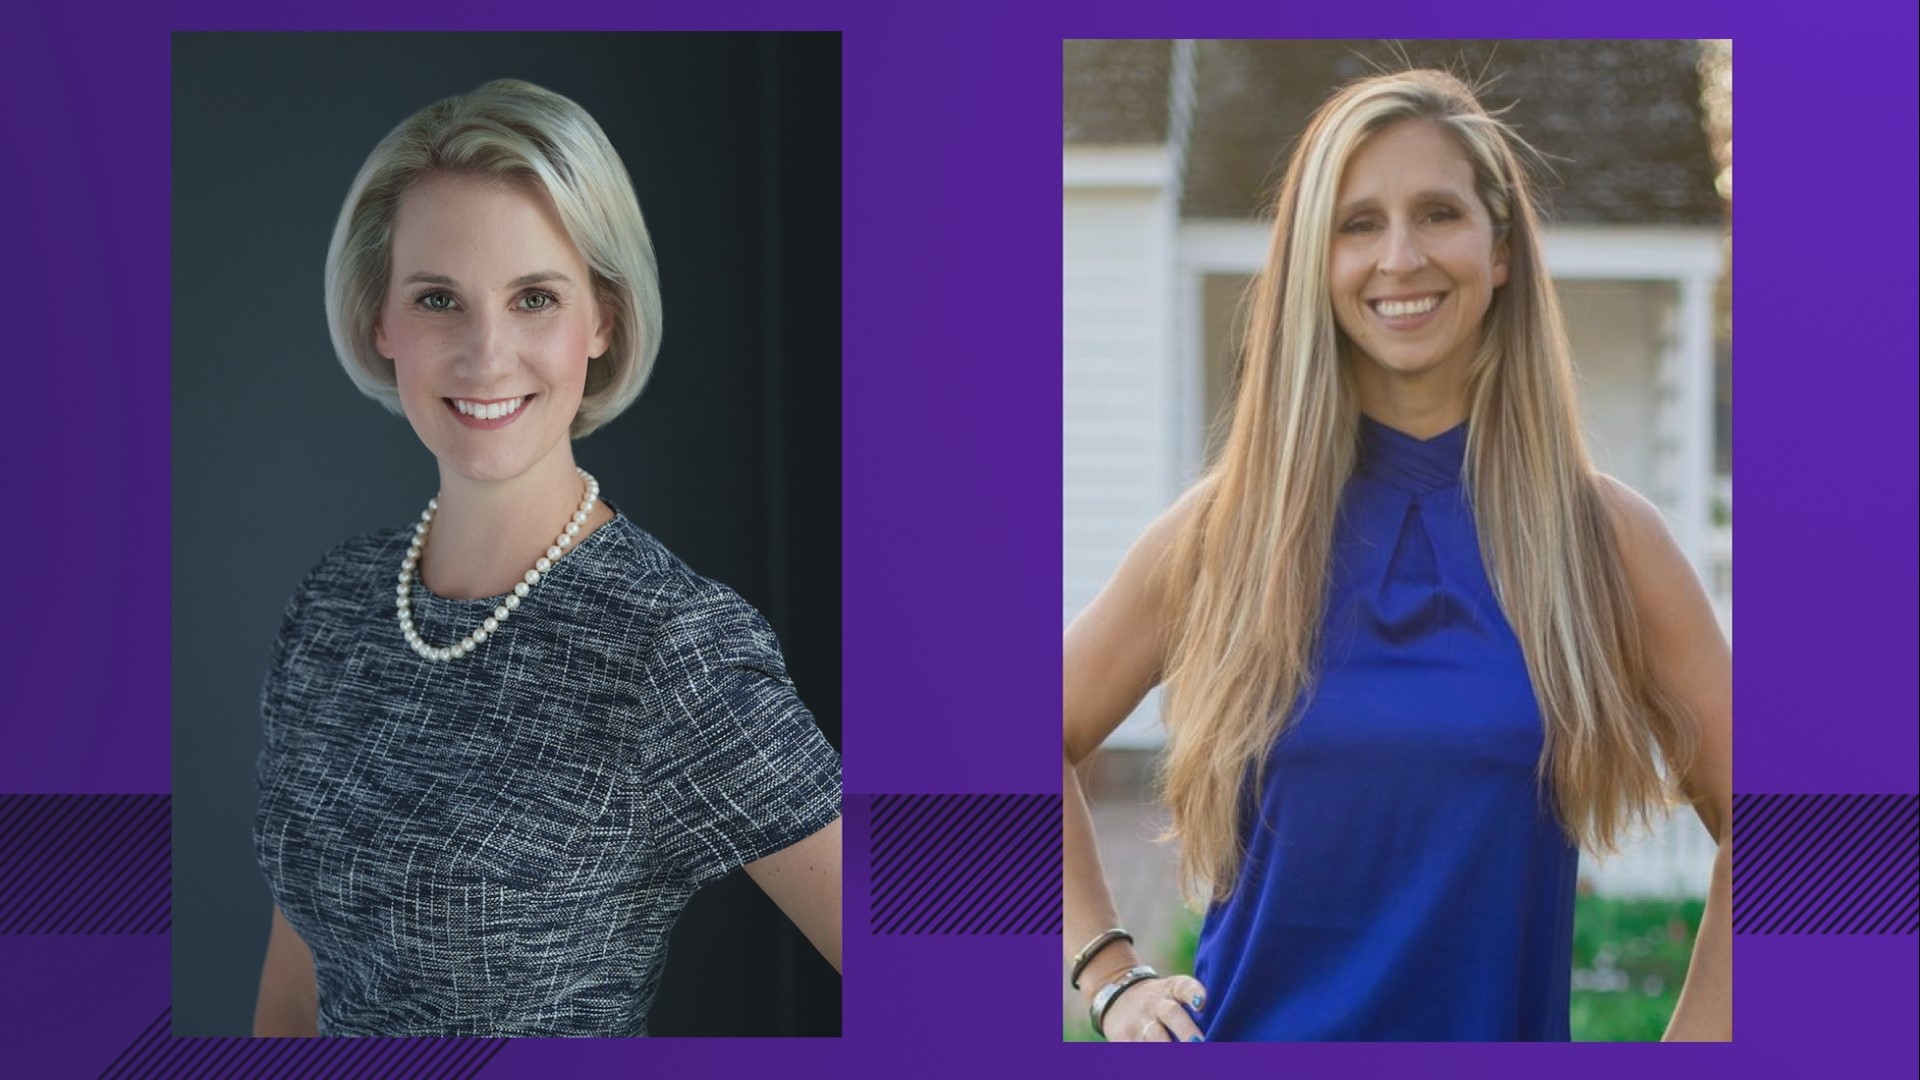 Alex Littlehales introduces us to the two women hoping to represent parts of Williamsburg, James City and New Kent counties in the House of Delegates.